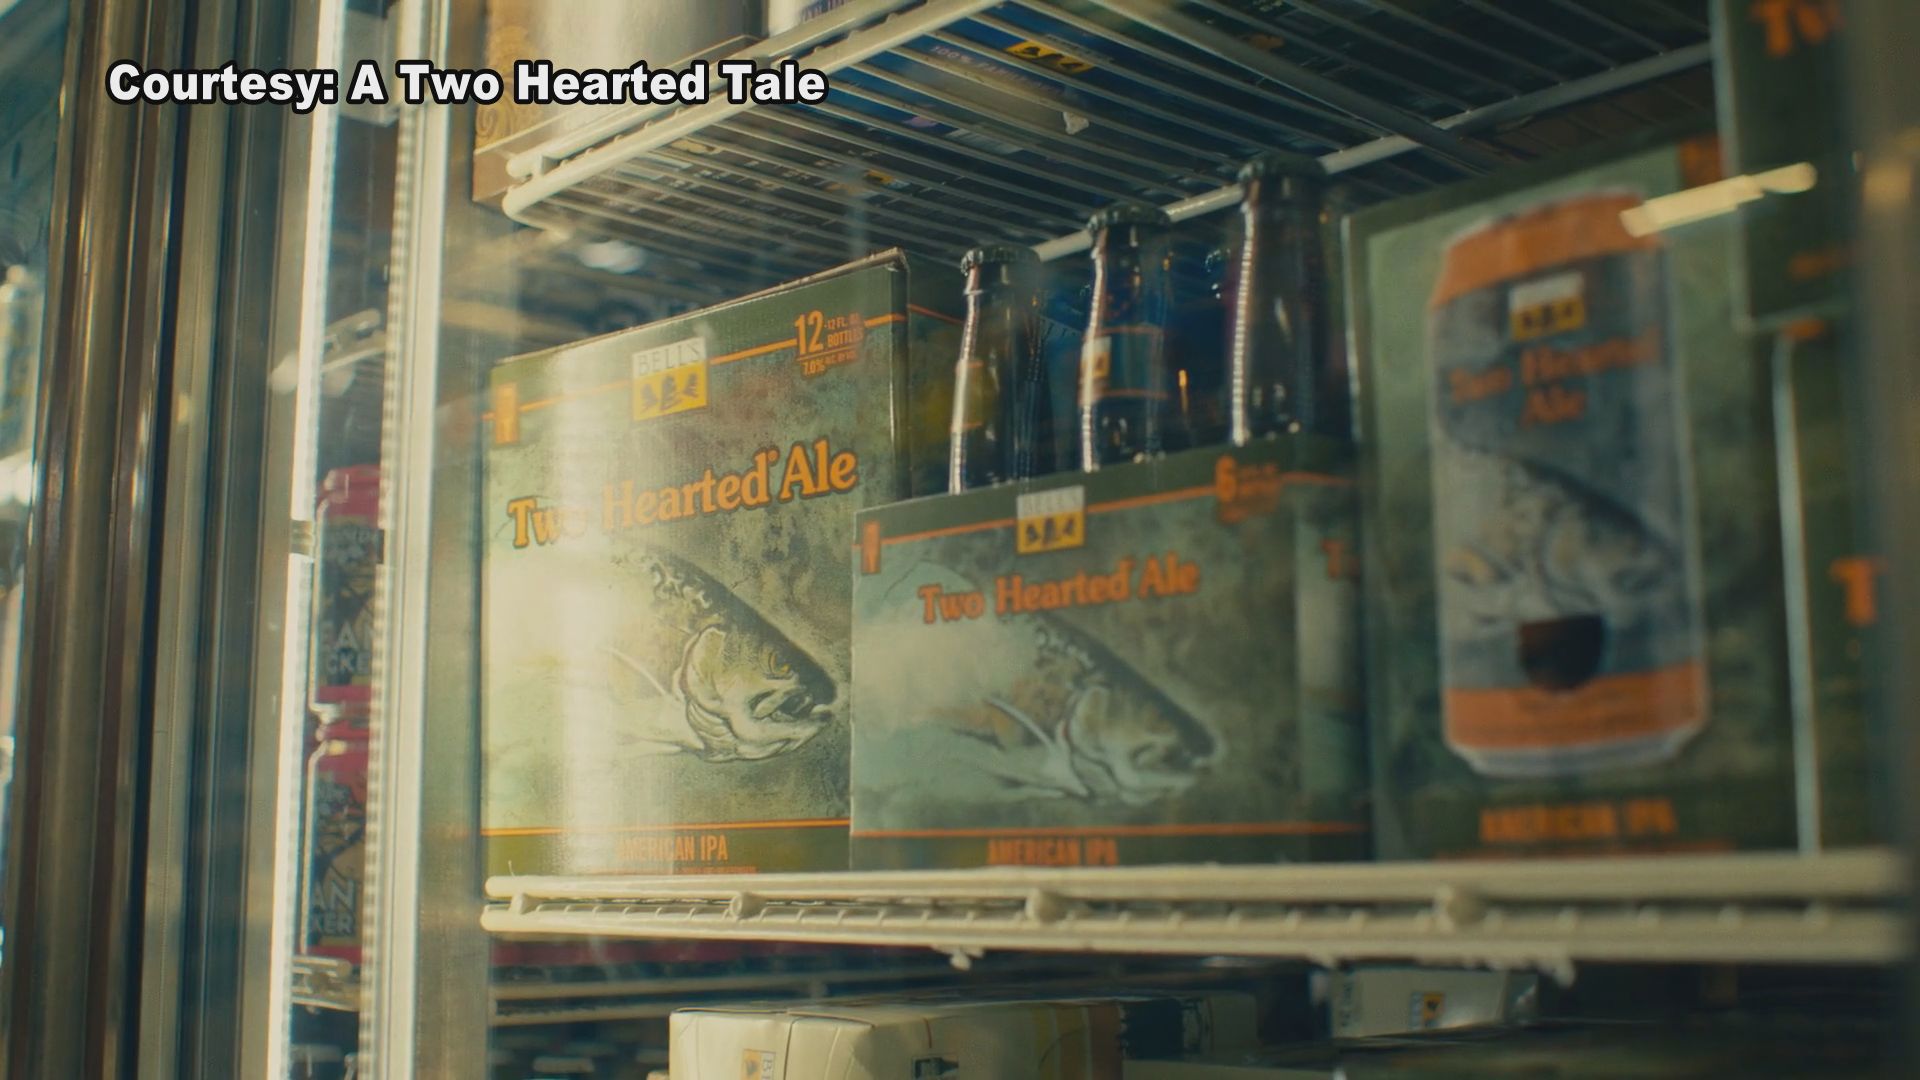 Filmmakers Brett McCard and Bret Miller set out to answer the burning question, "Why did they put a trout on Two Hearted Ale?"